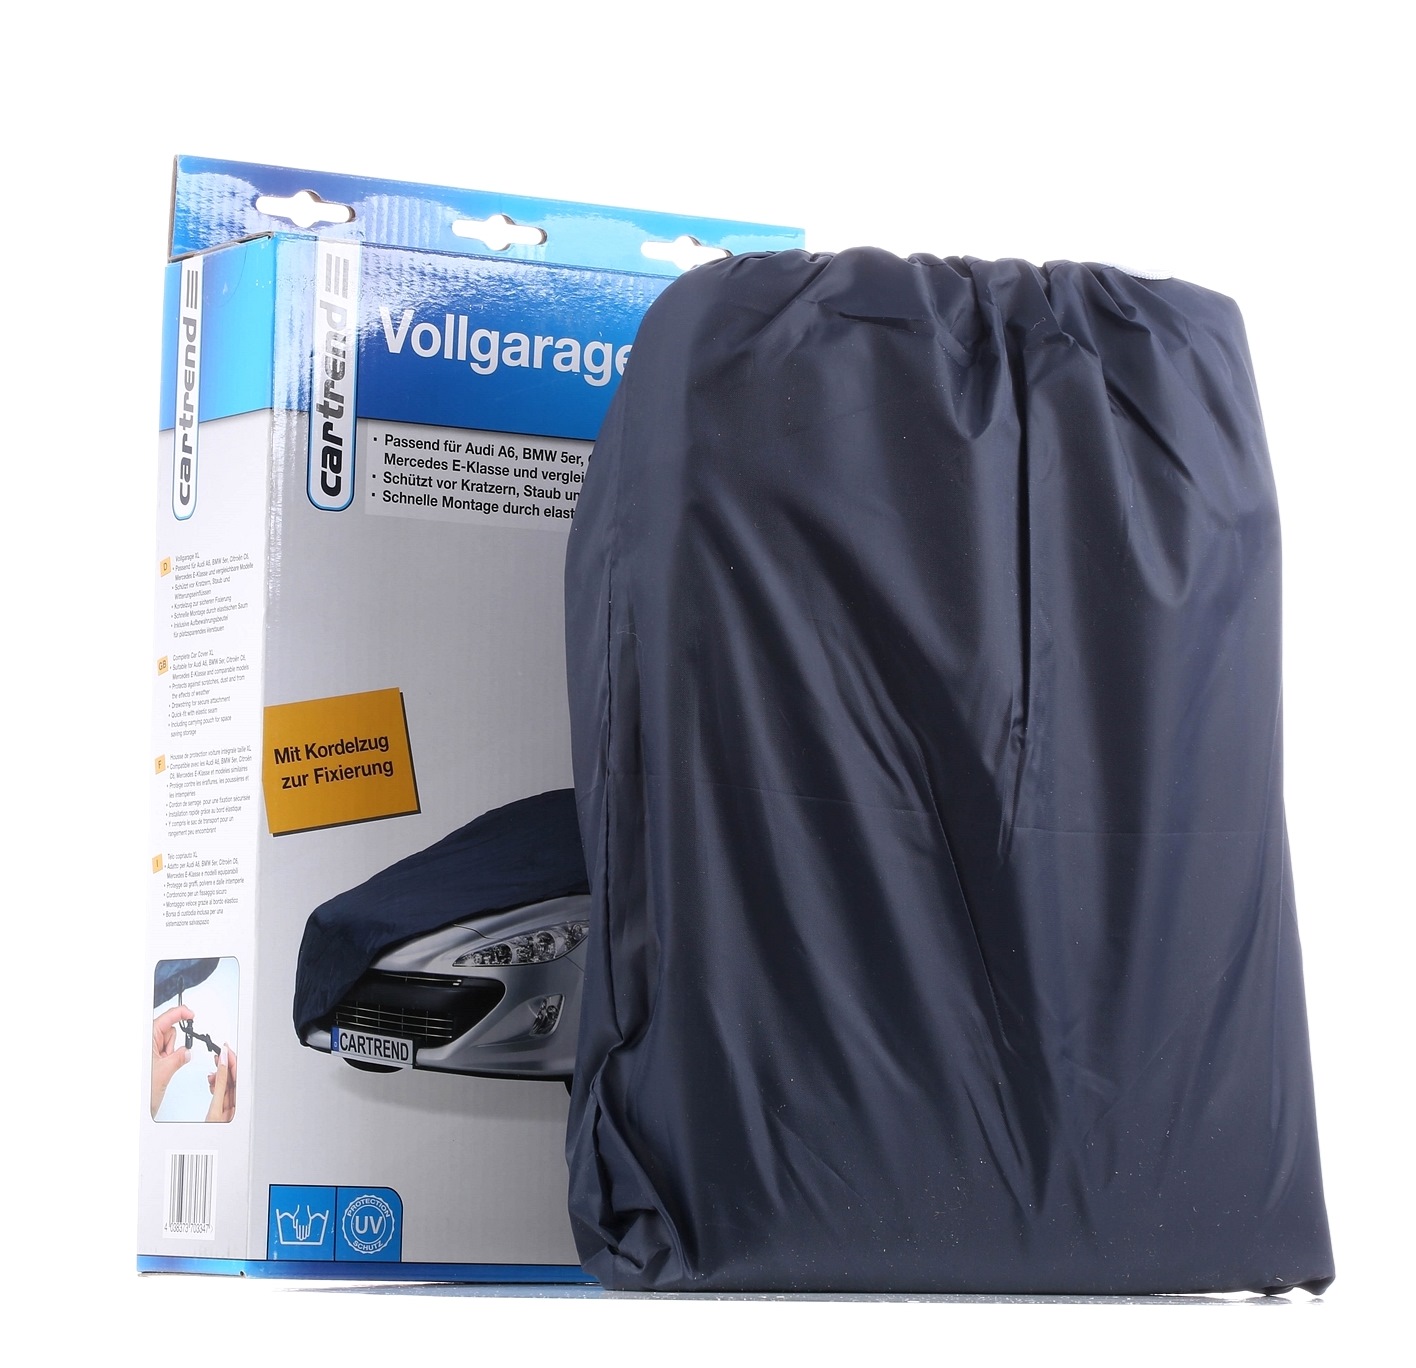 CARTREND full-size, XL 209x522 cm, blue Length: 522cm, Width: 209cm, Height: 148cm Car protection cover 70334 buy